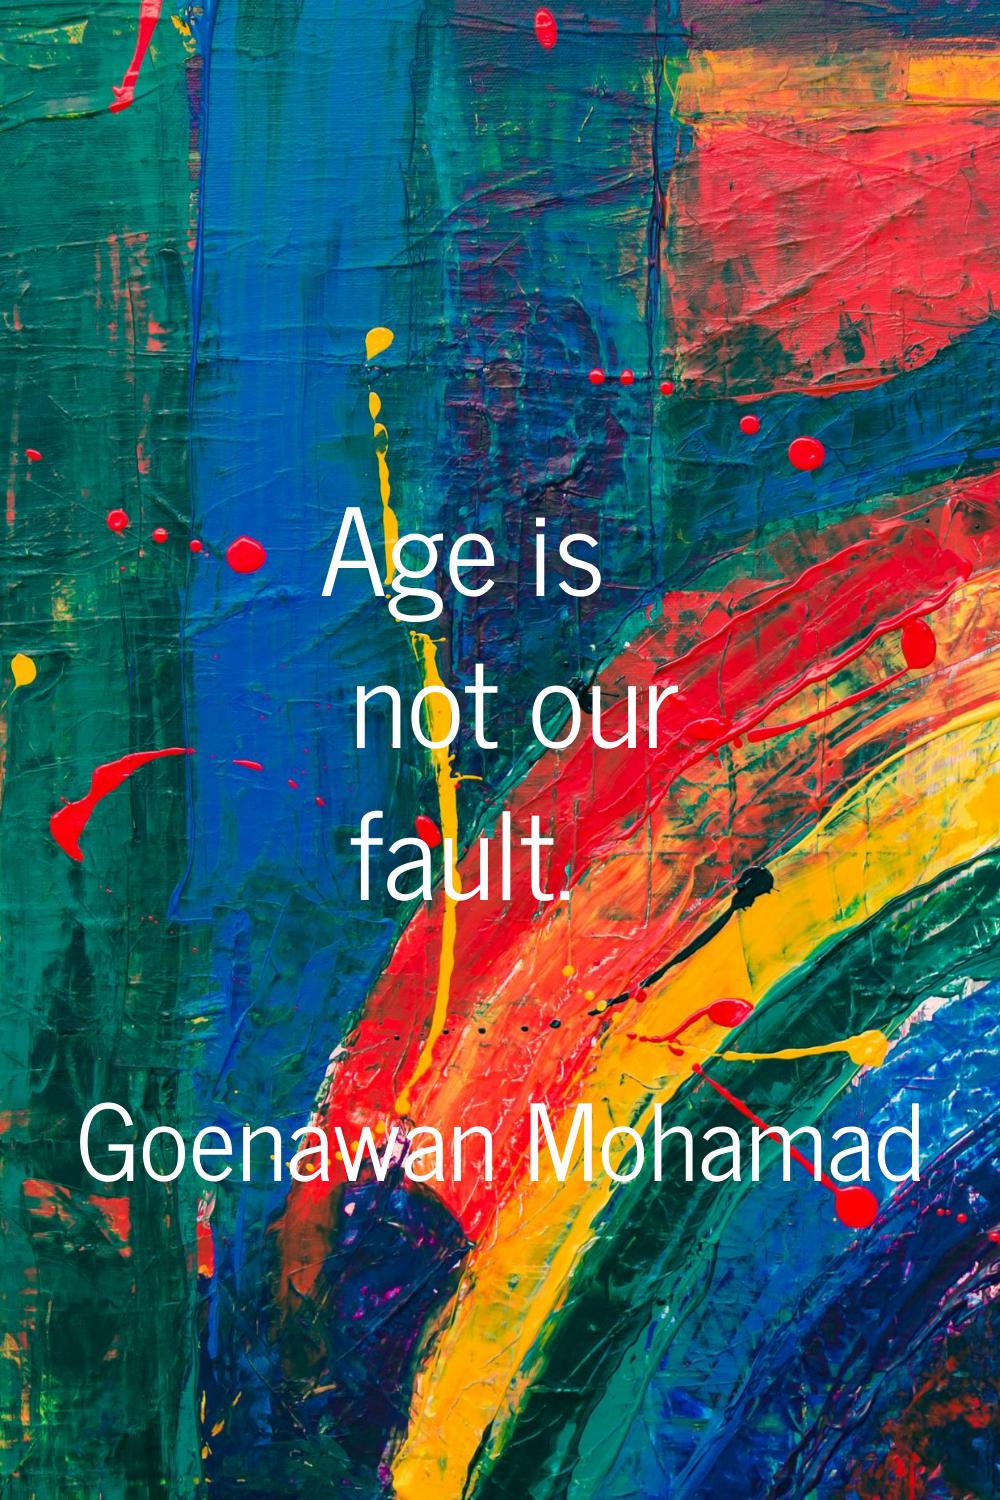 Age is not our fault.